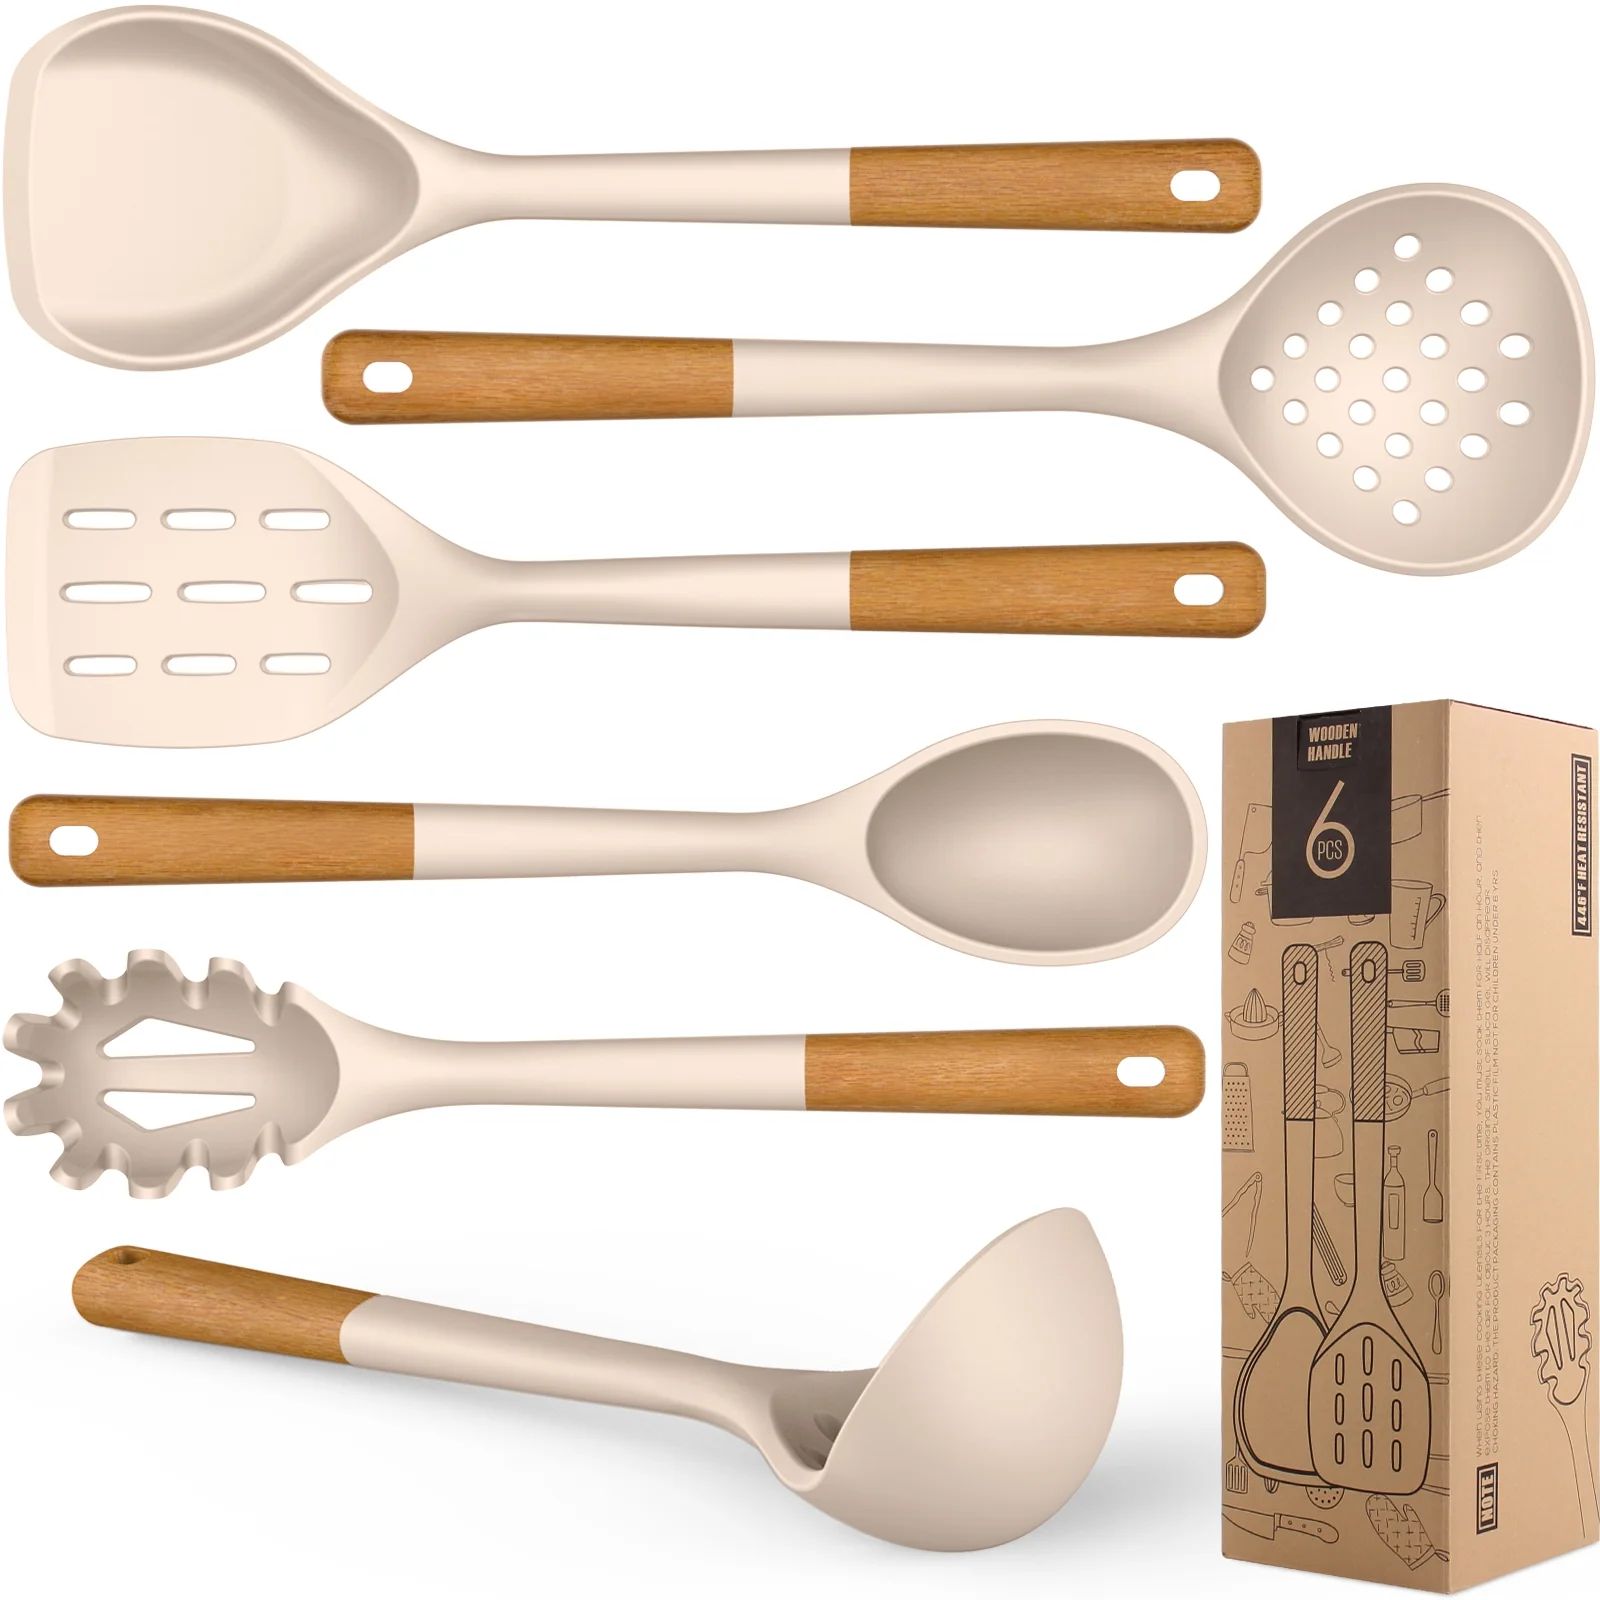 Large Silicone Cooking Utensils - Heat Resistant Kitchen Utensil Set with Wooden Handles, Spatula... | Walmart (US)